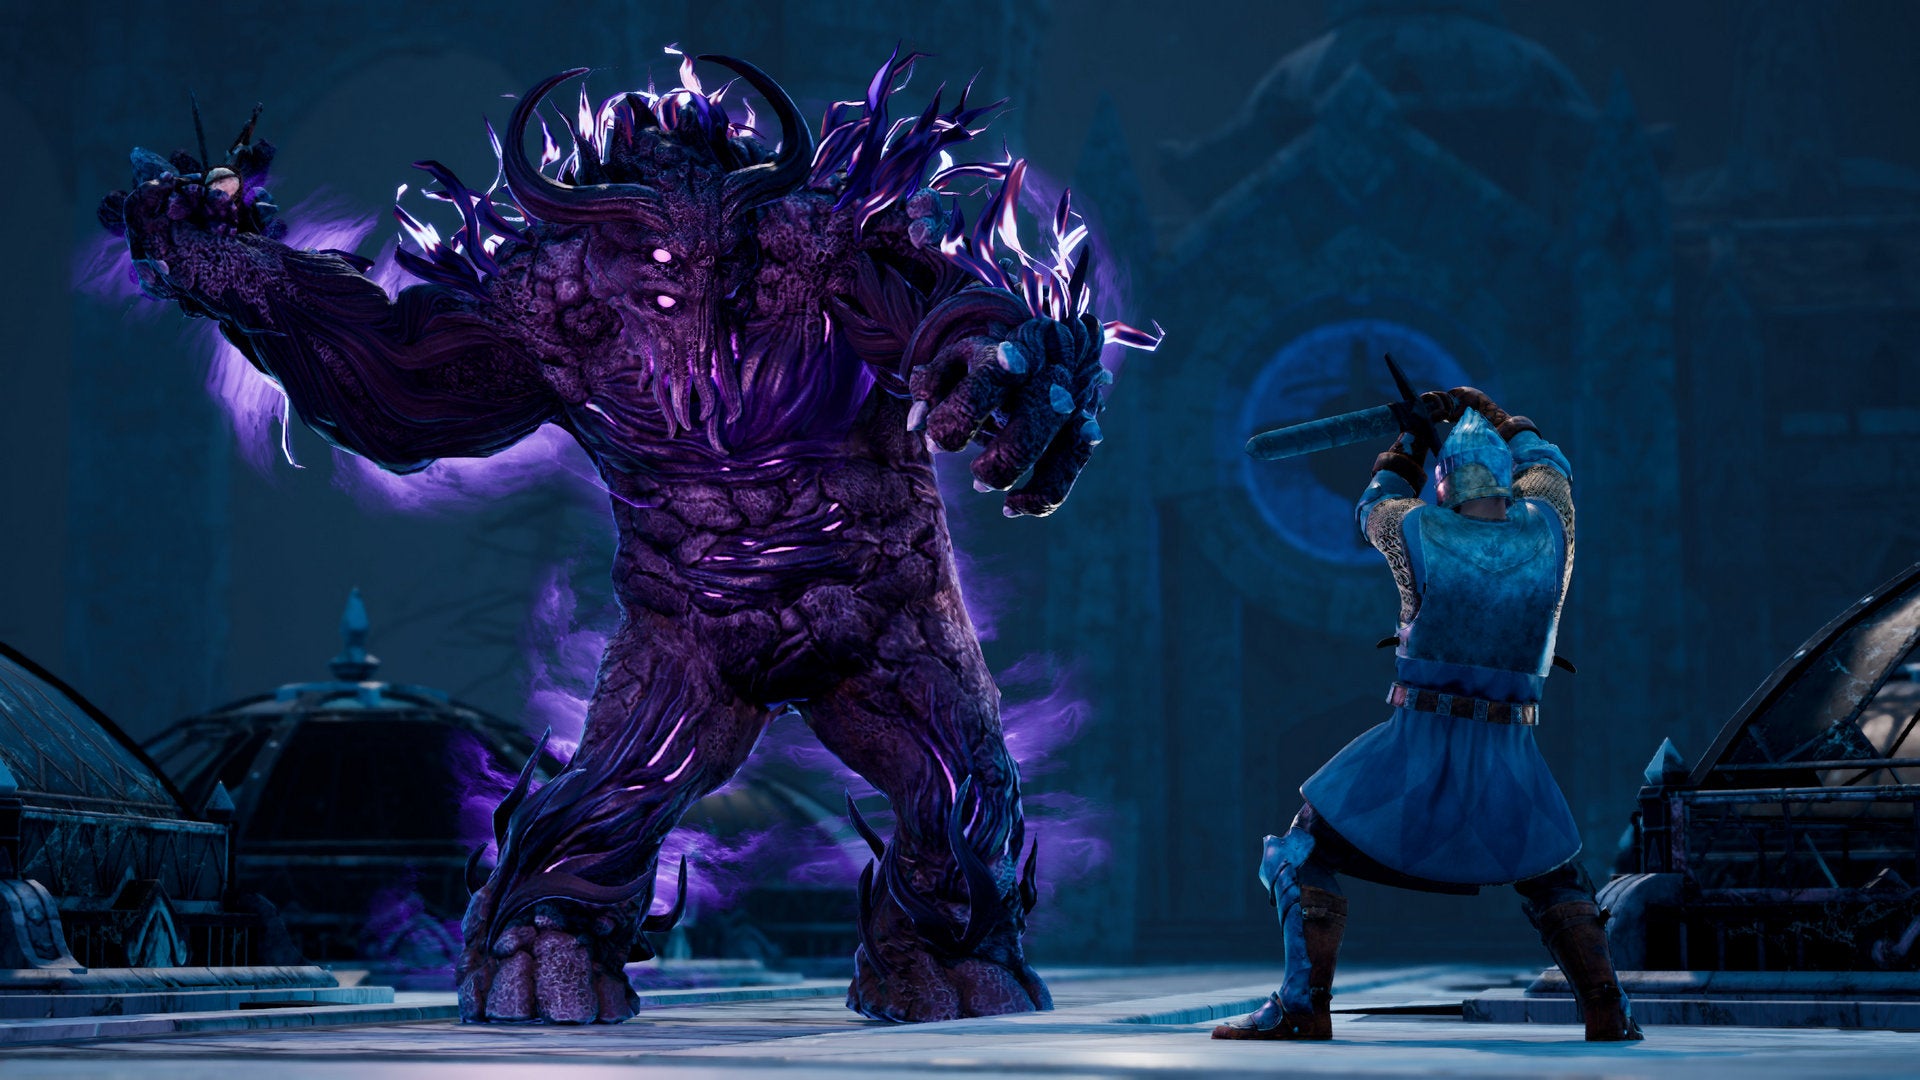 A knight raises his sword against a purple beast in King's Bounty 2